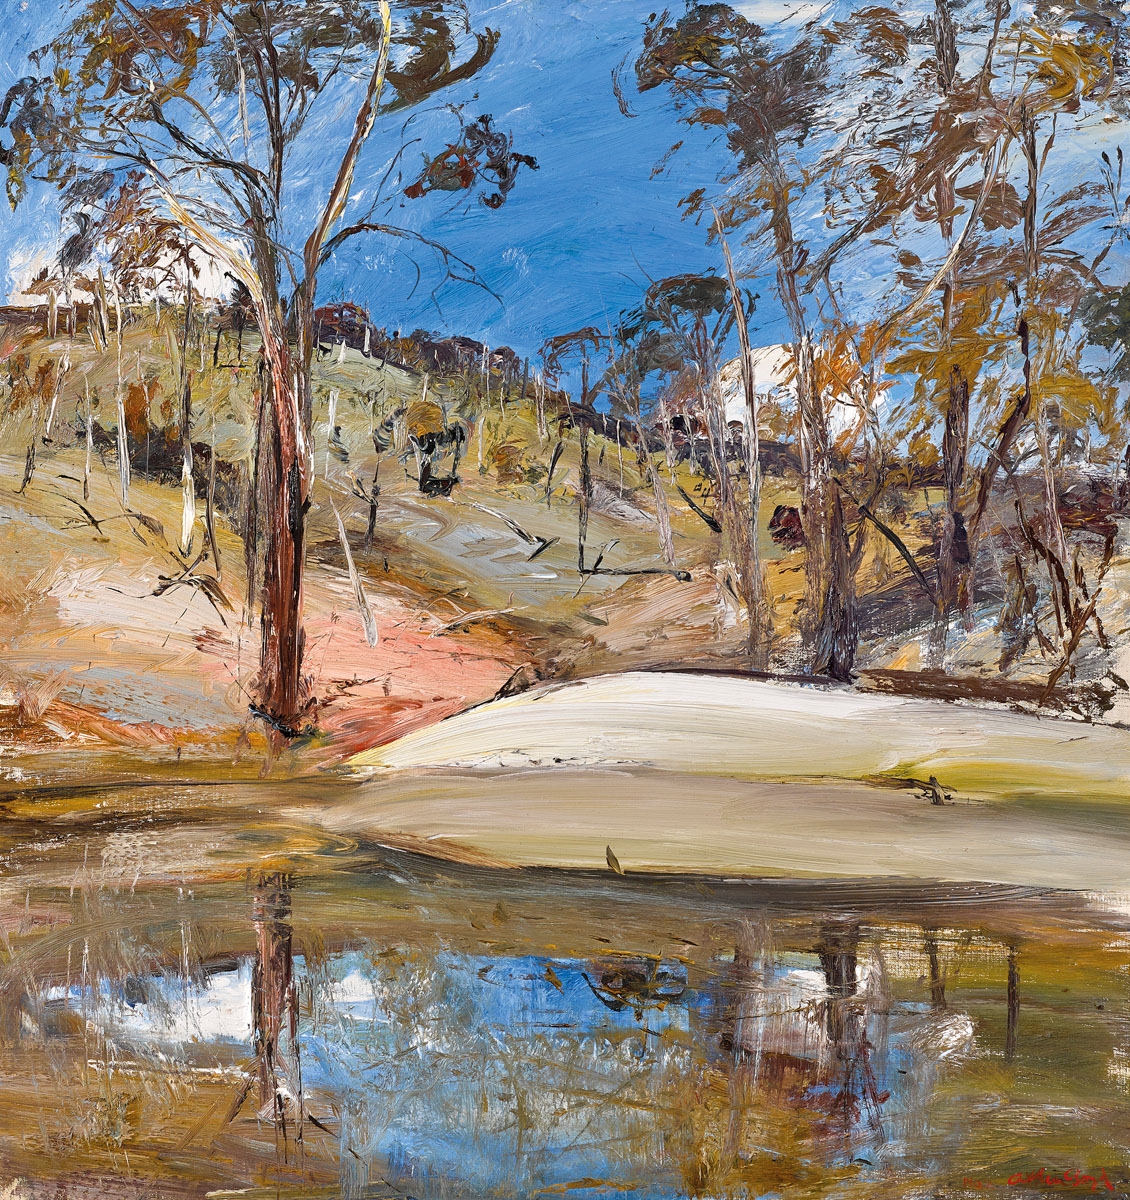 Artwork by Arthur Boyd, Landscape with Dam, Made of Oil on canvas